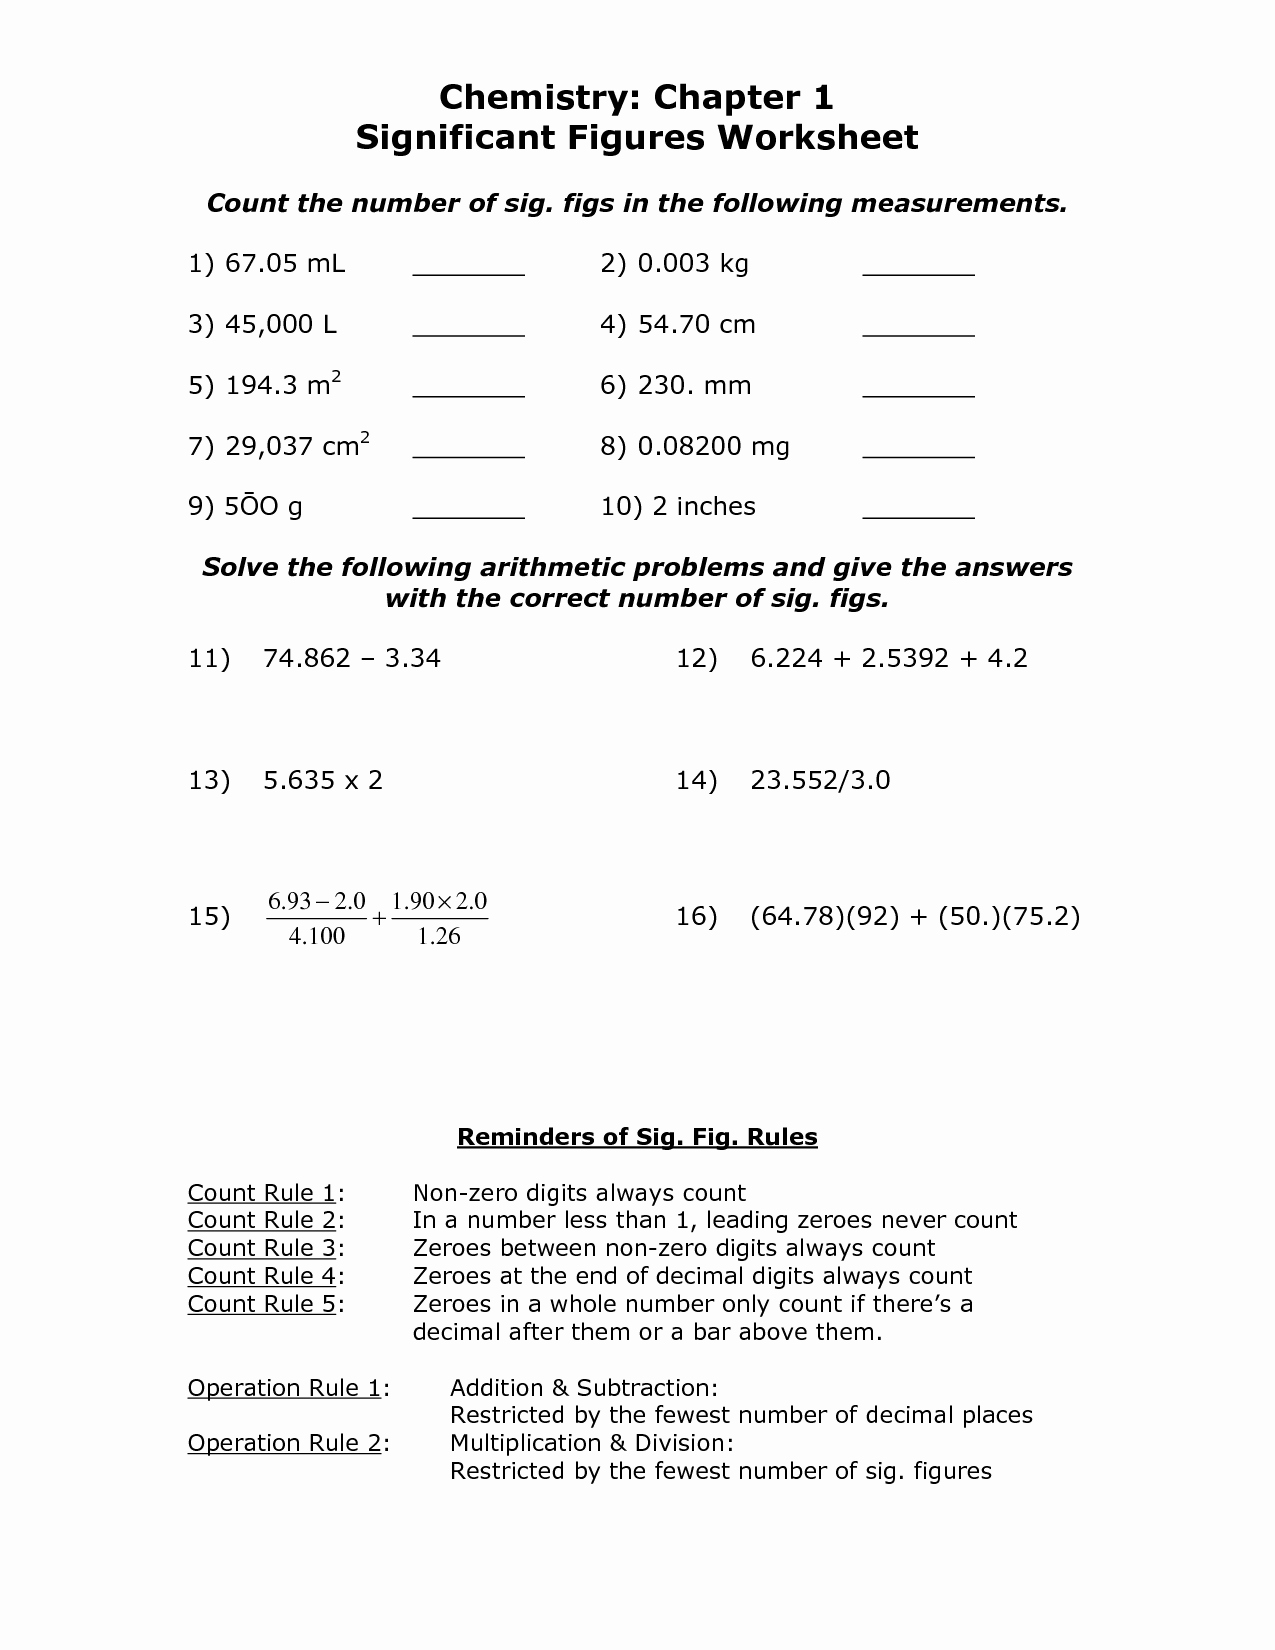 Significant Figures Worksheet Answers Best Of 14 Best Of Classification Matter Worksheet